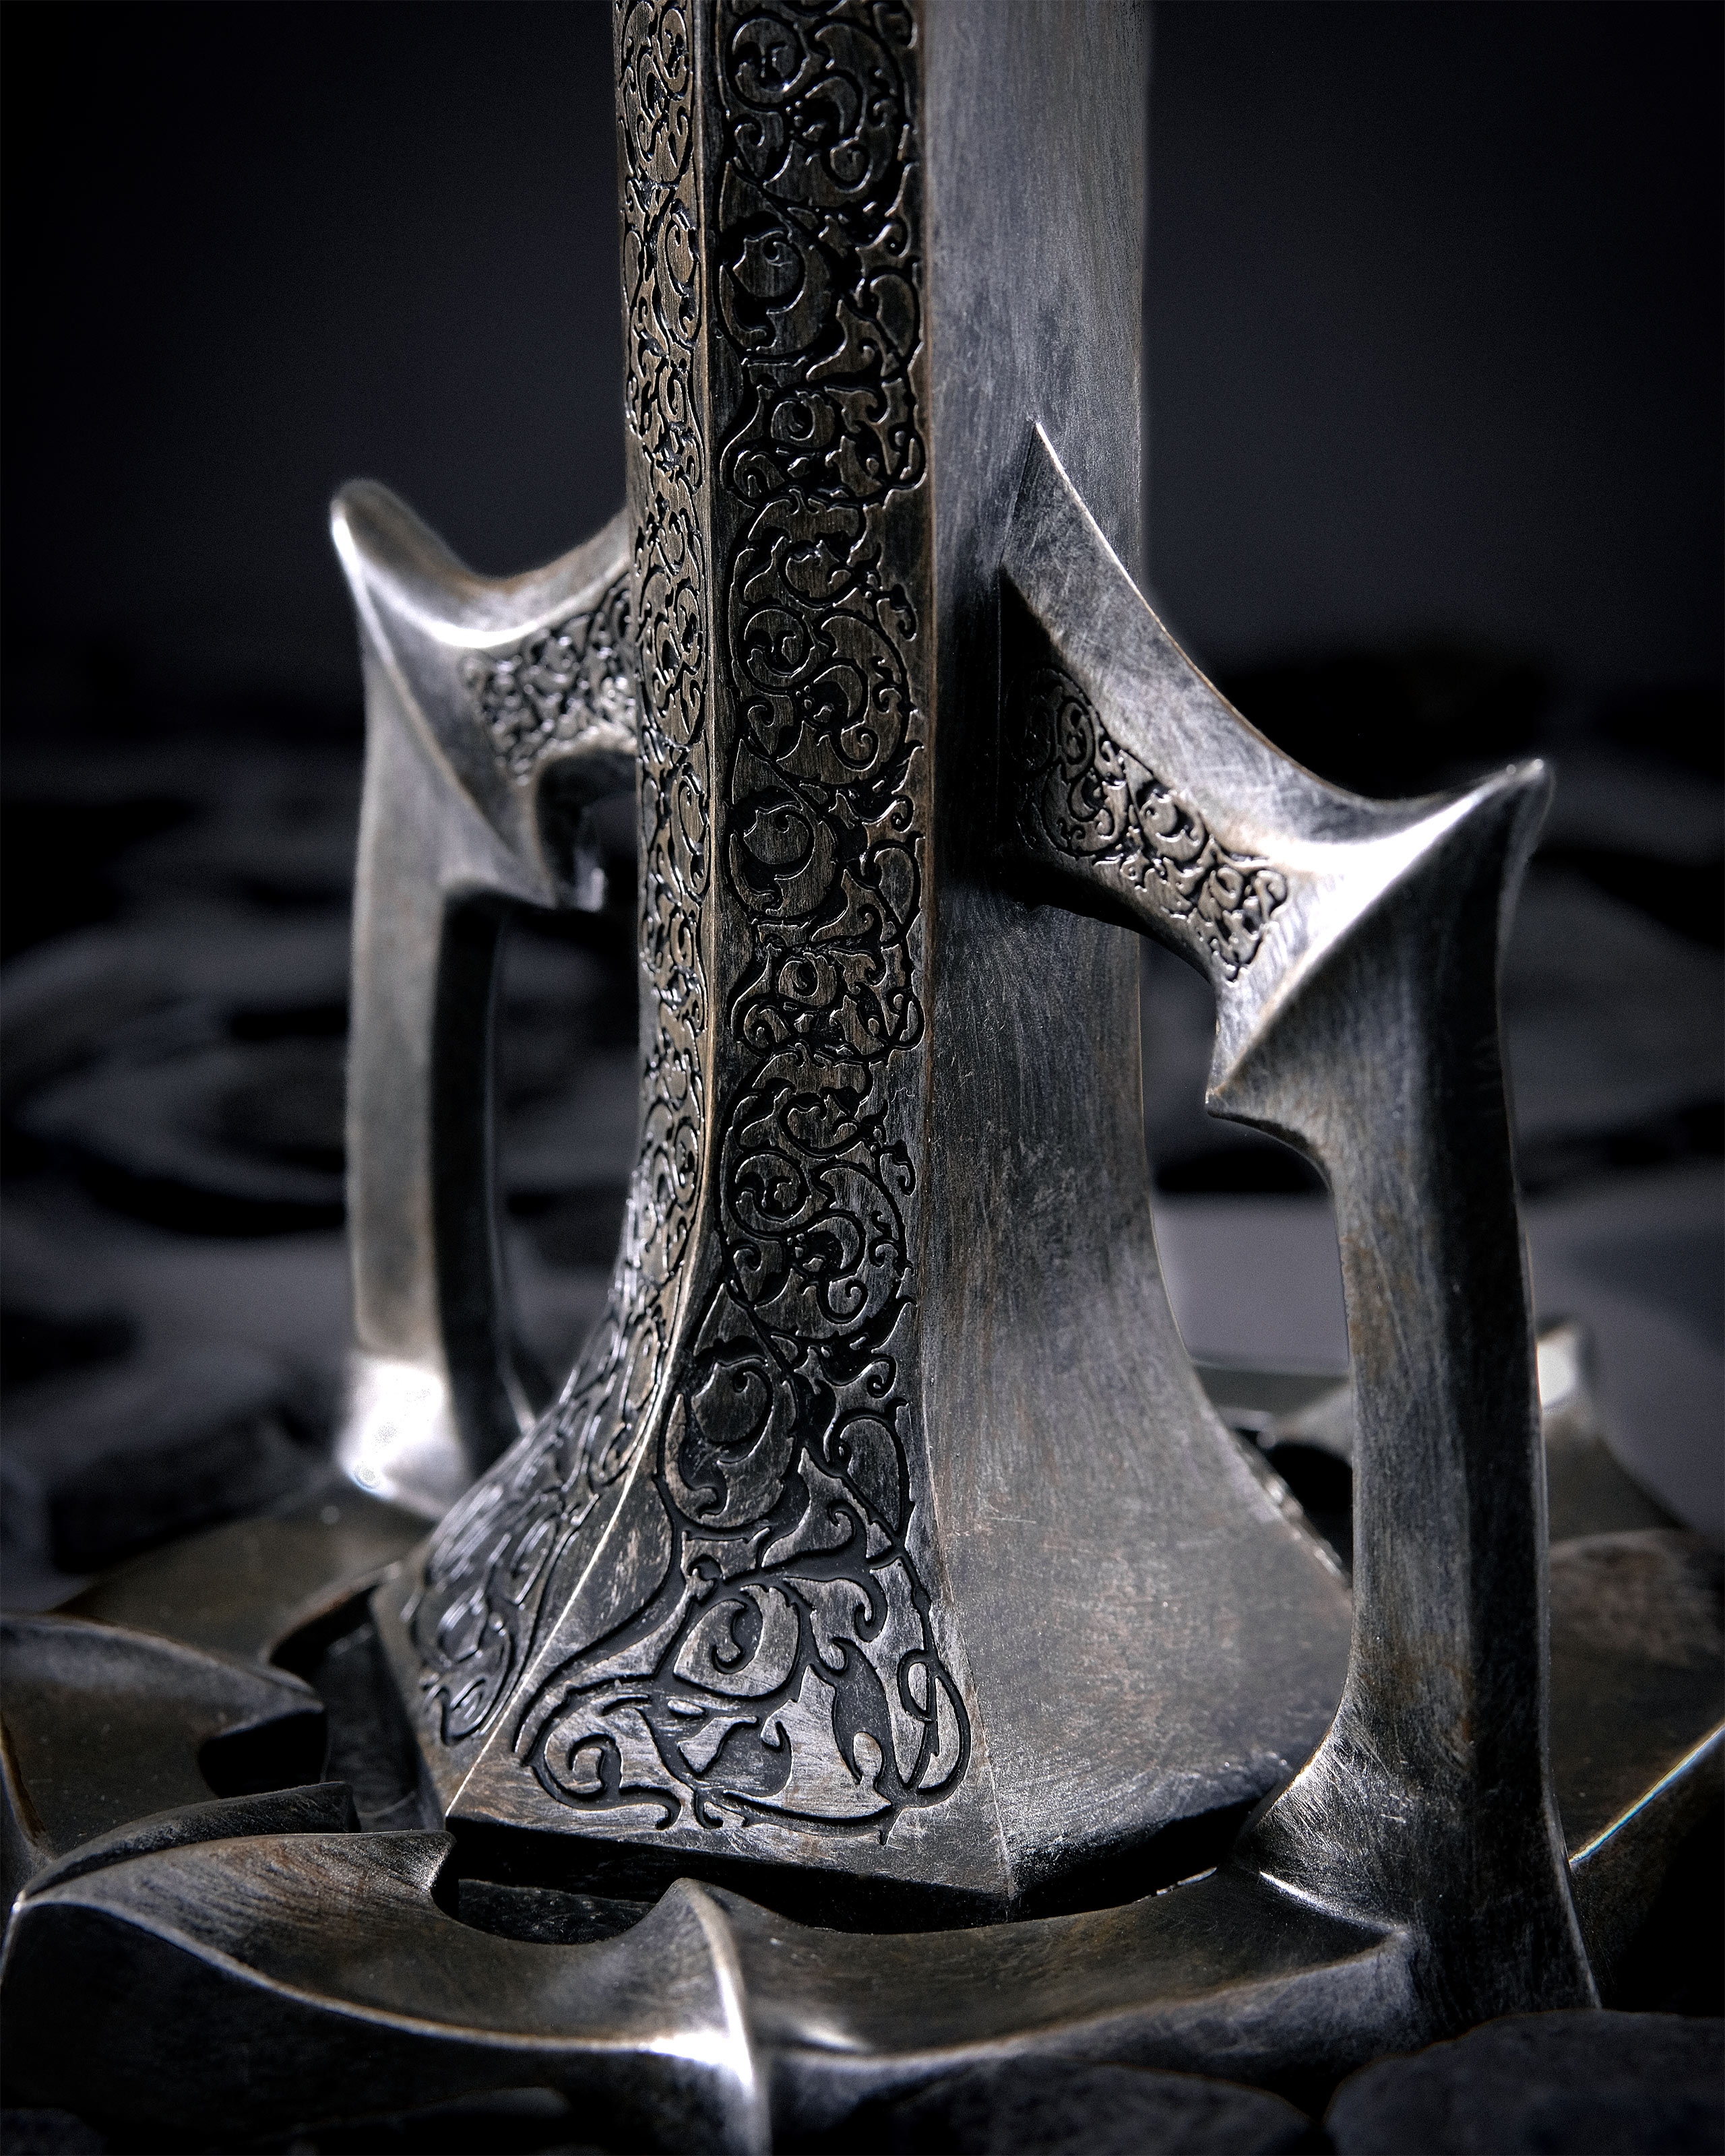 Saurons Helm Replica - Lord of the Rings